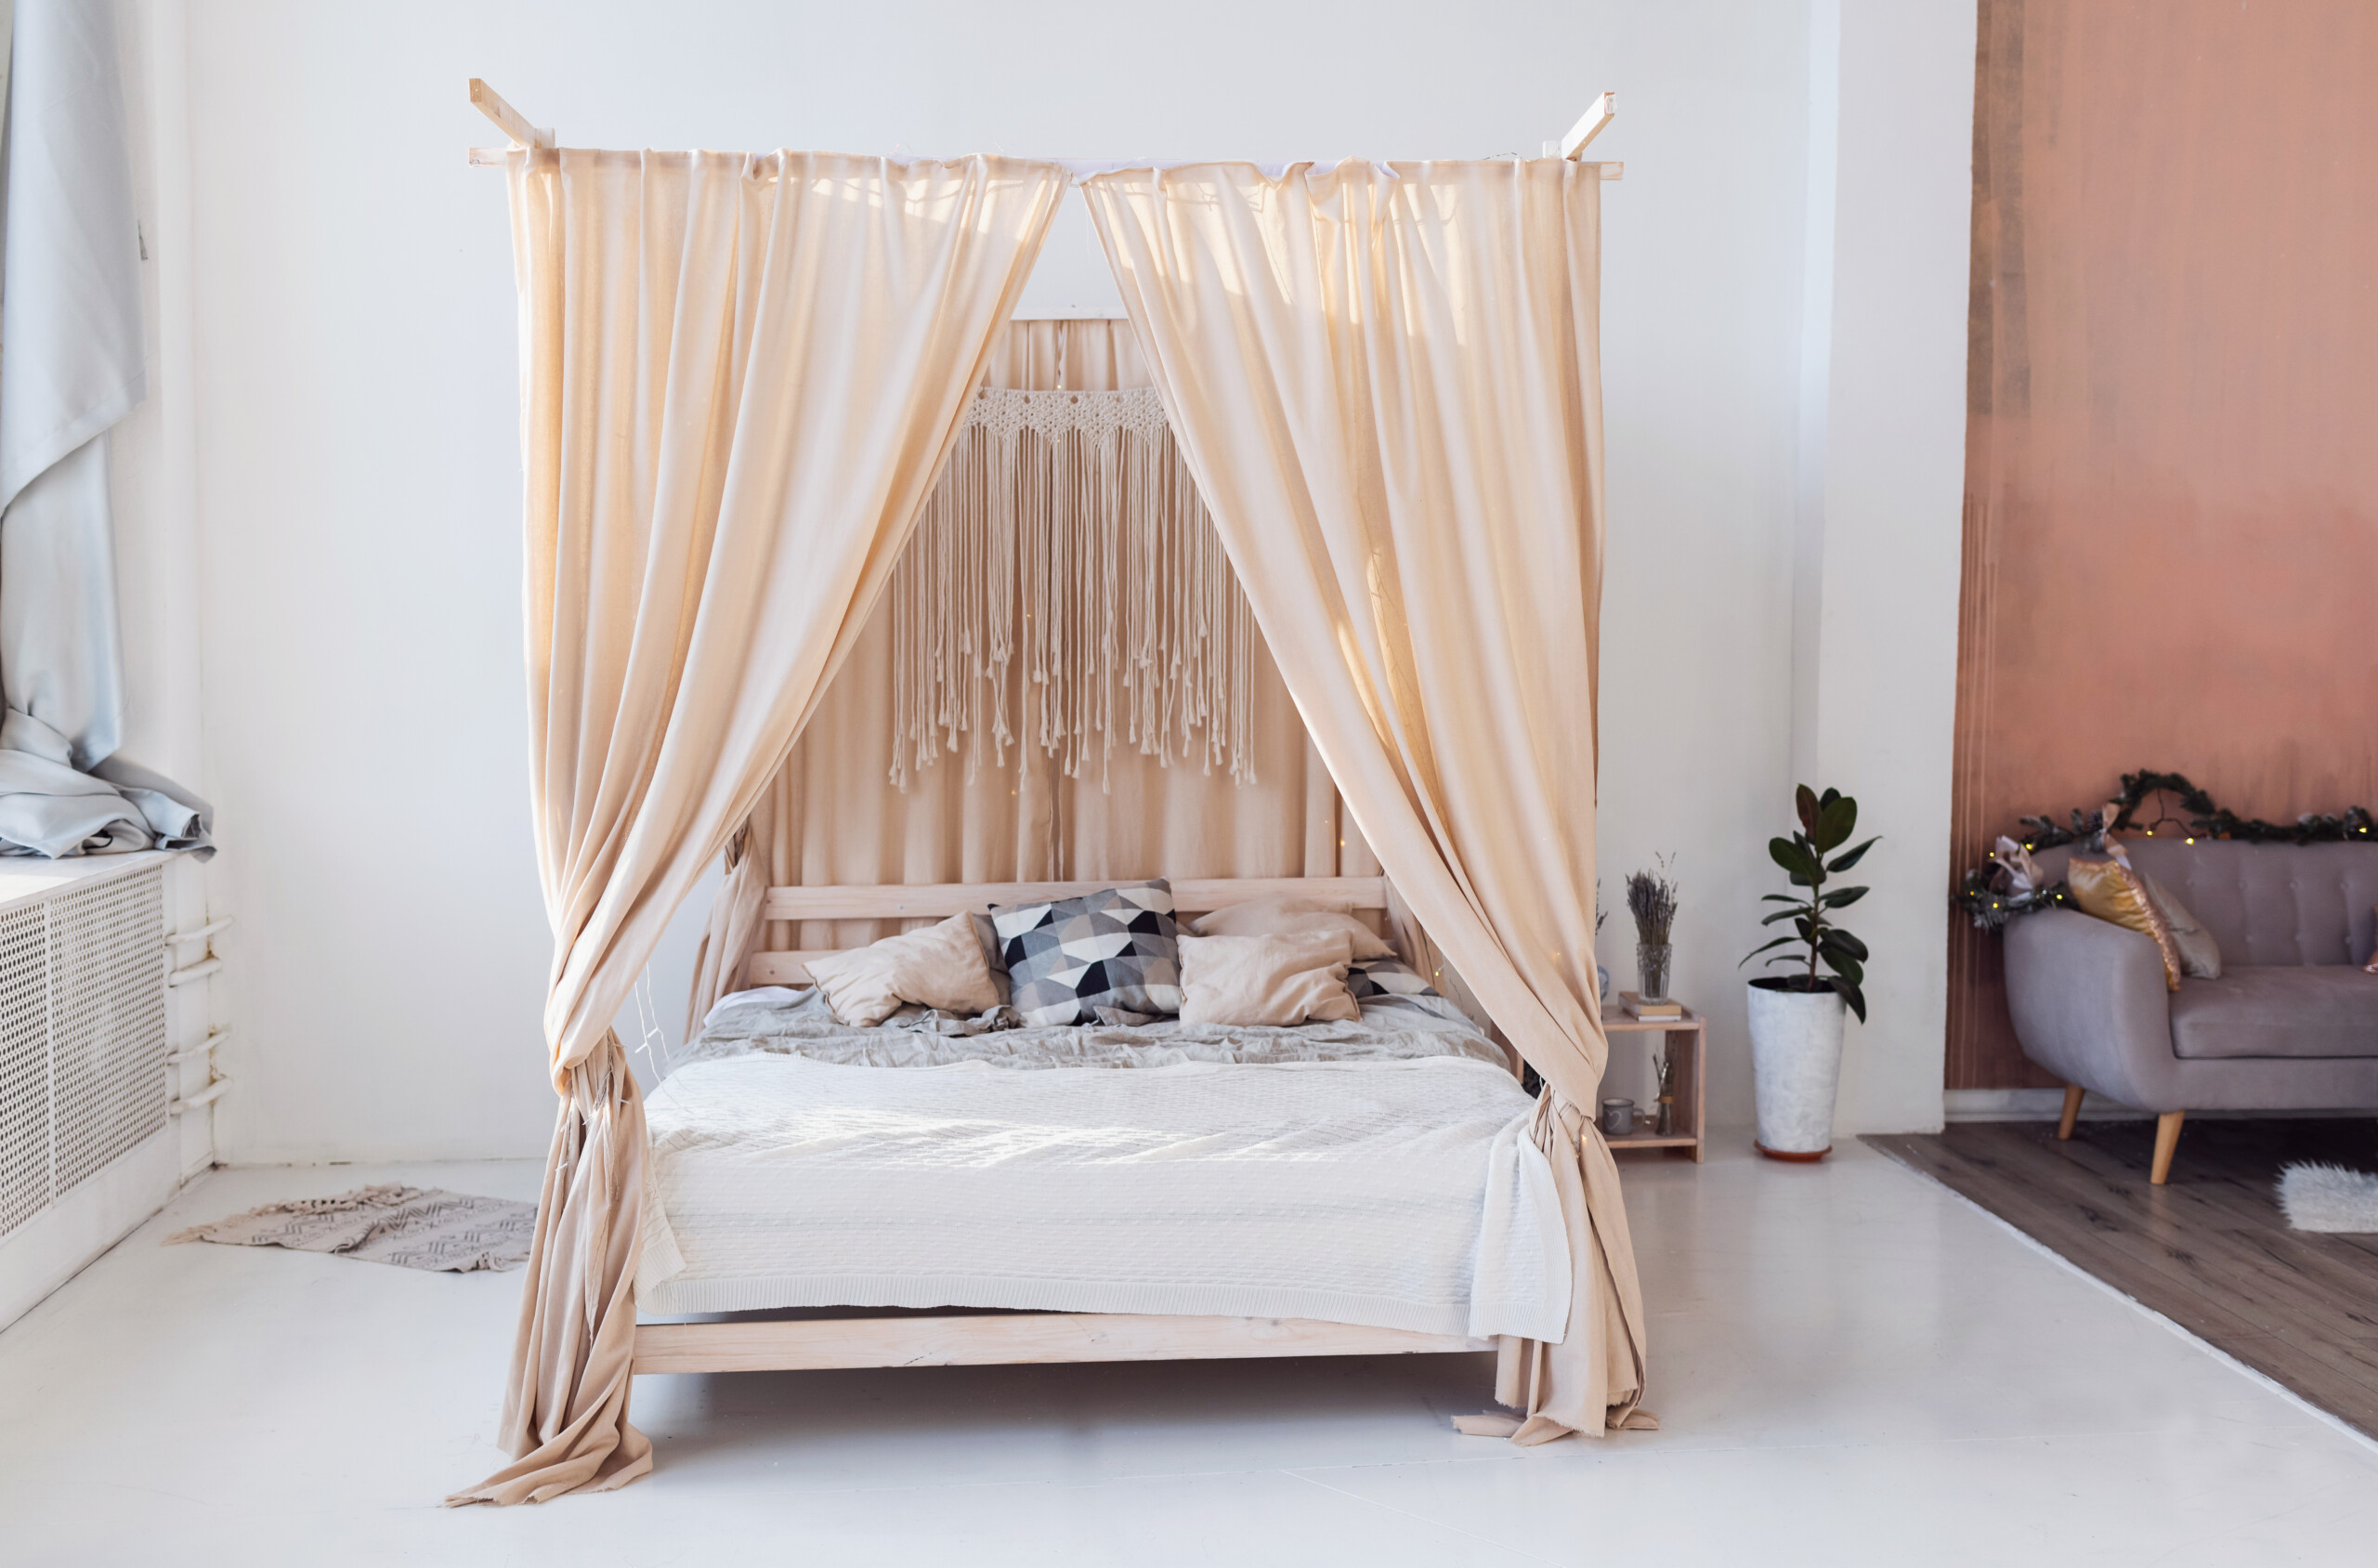 Bed Canopy in Harmonious Color Tones